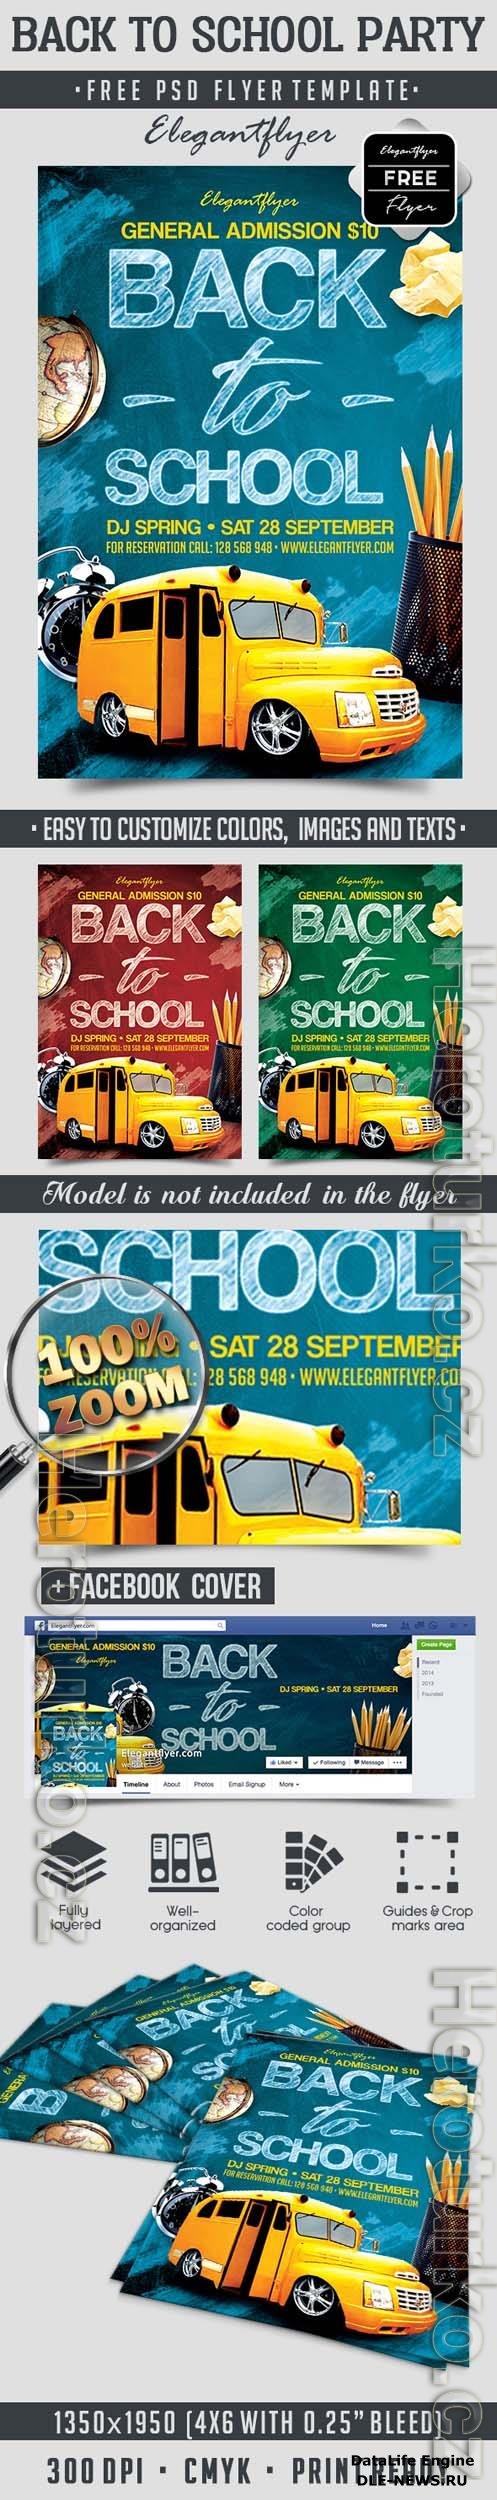 Back to School Party Flyer PSD Template